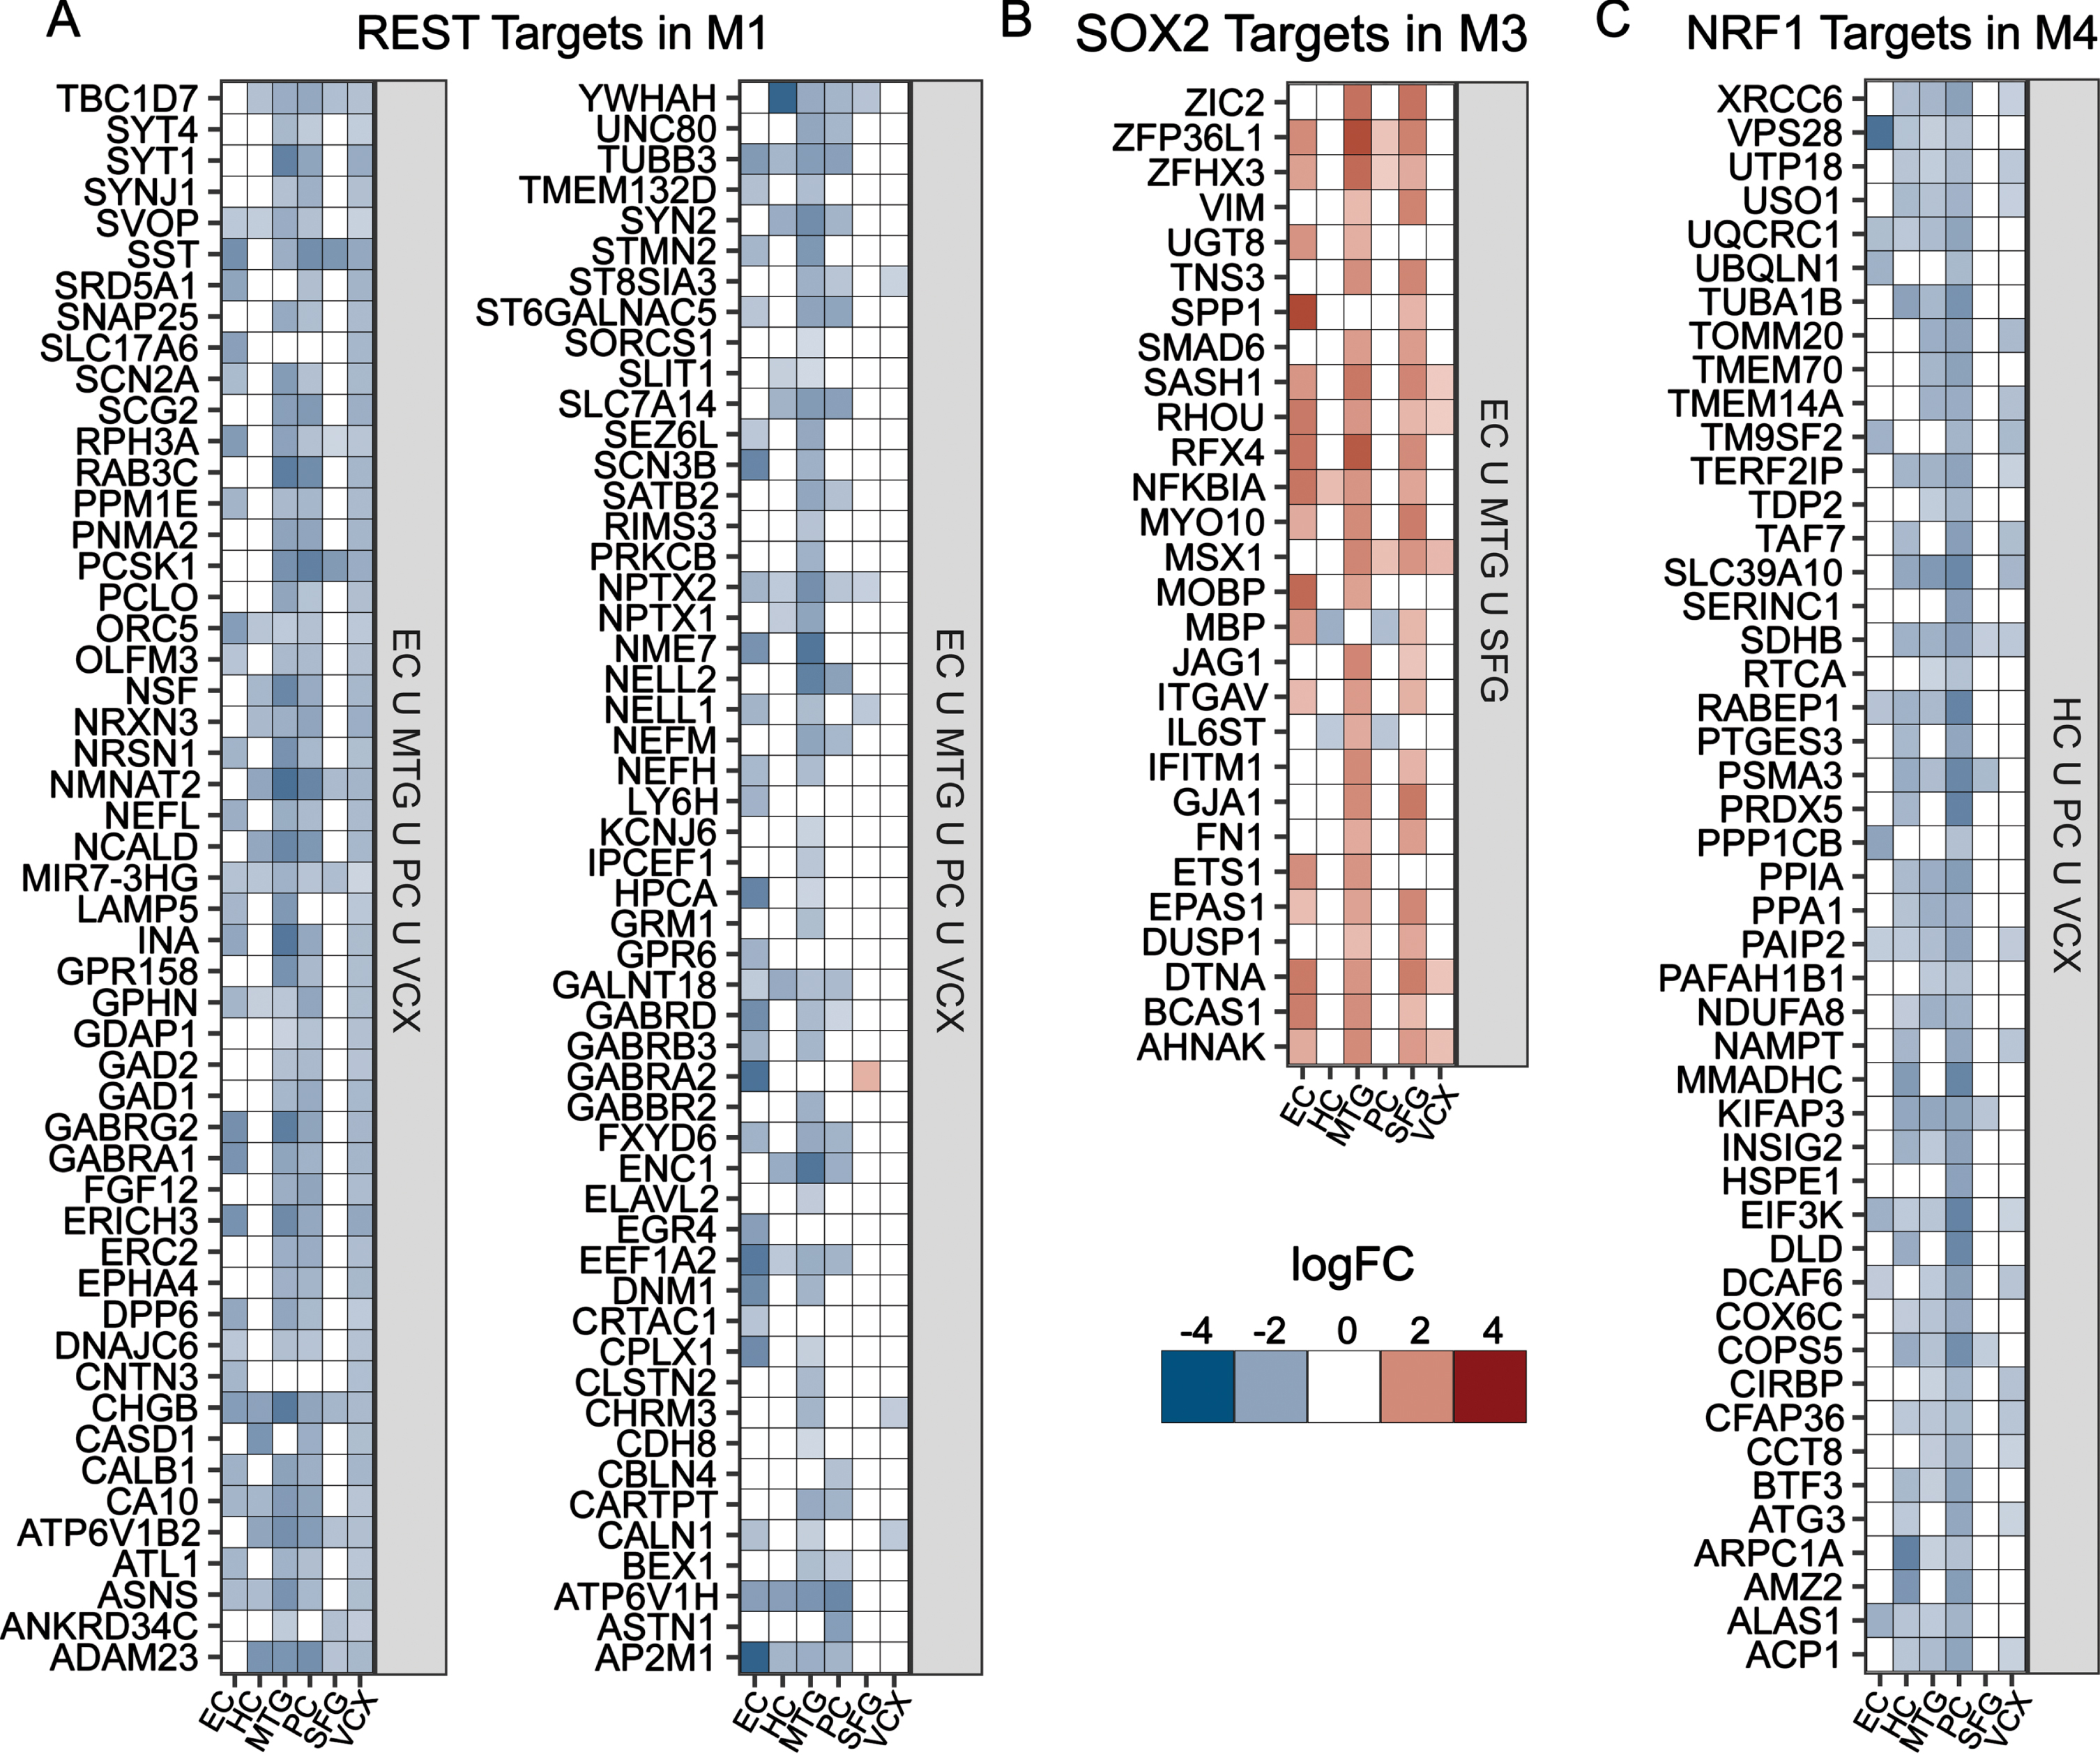 TF target differential gene expression for Module-specific TFs. A-D) Gene expression heatmaps for the targets of key TFs identified for modules M1, M3, and M4; (A) M1 REST targets in EC ∪ MTG ∪ PC ∪ VCX; (B) M3 SOX2 targets in EC ∪ MTG ∪ SFG; and (C) M4 NRF1 targets that are in HC ∪ PC ∪ VCX.